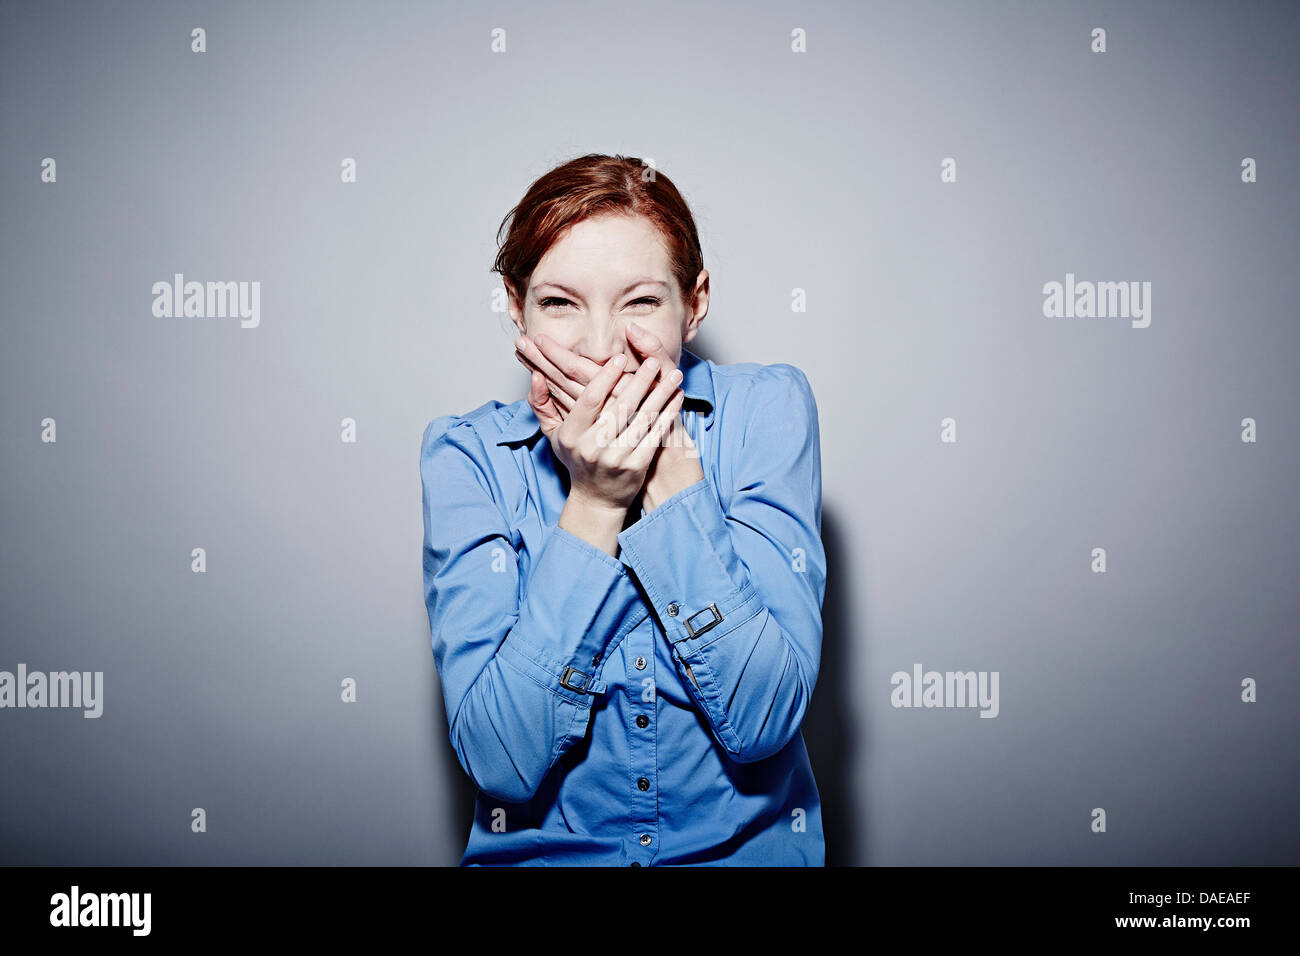 Studio portrait of young woman giggling Stock Photo